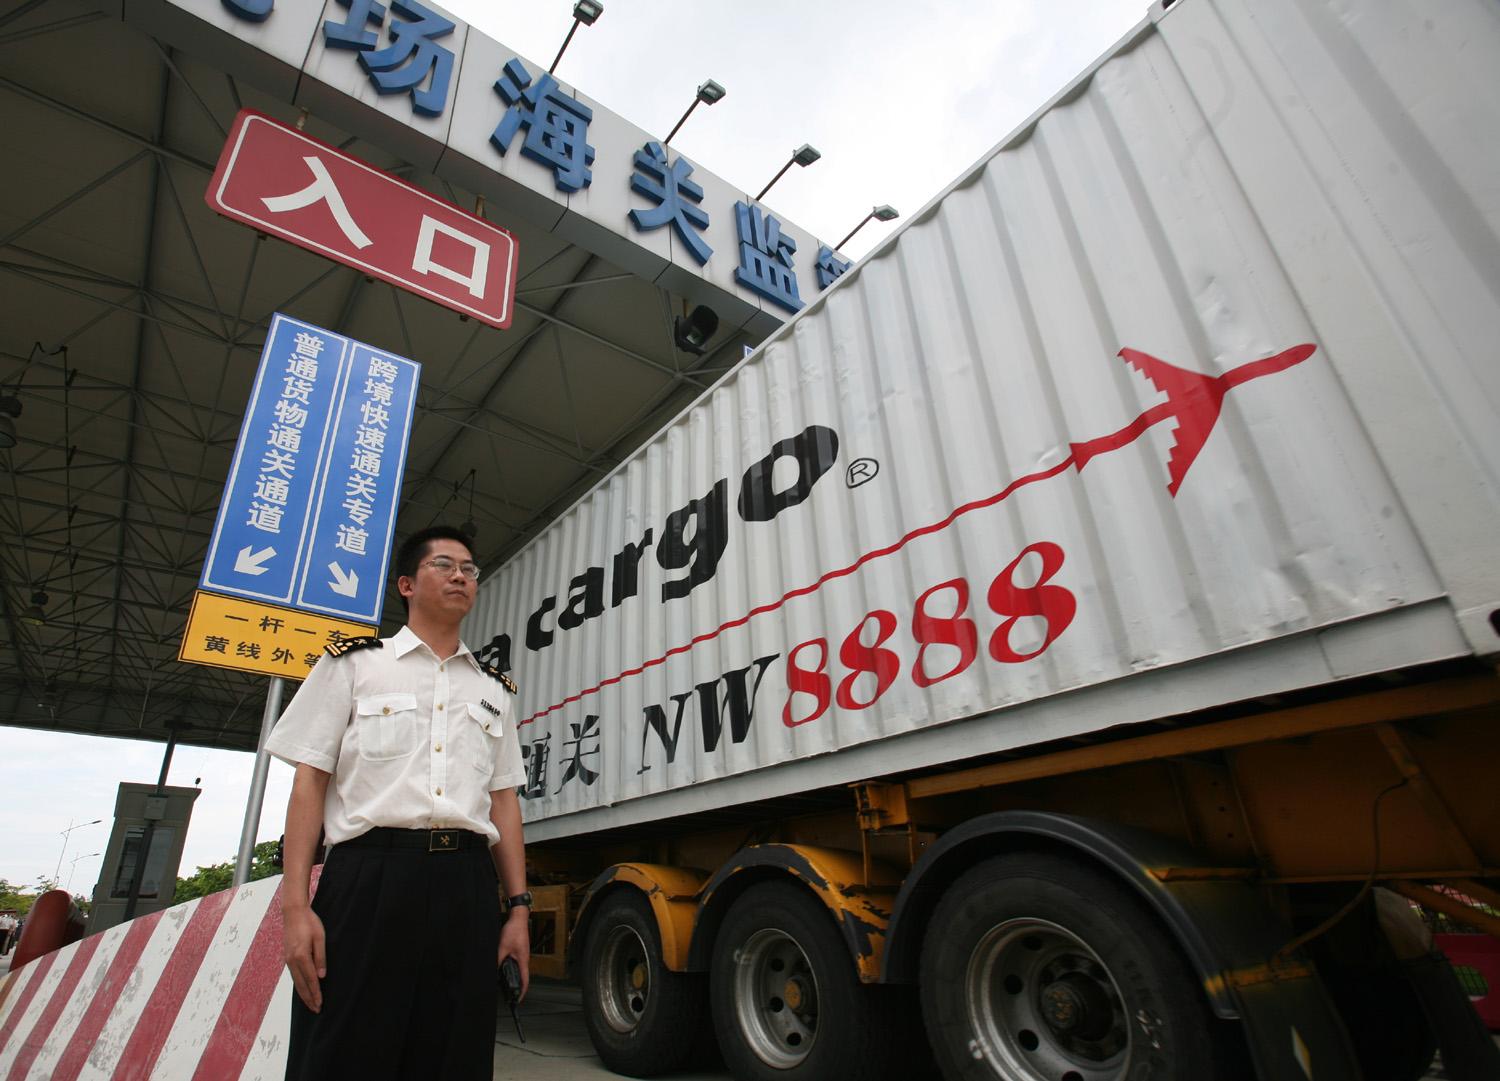 The Logistic Expressway between Guangzhou and Hong Kong Opened and    Cross-Border Quick-Customs-Clearance System    Started up in Guangzhou Baiyun Airport Customs House